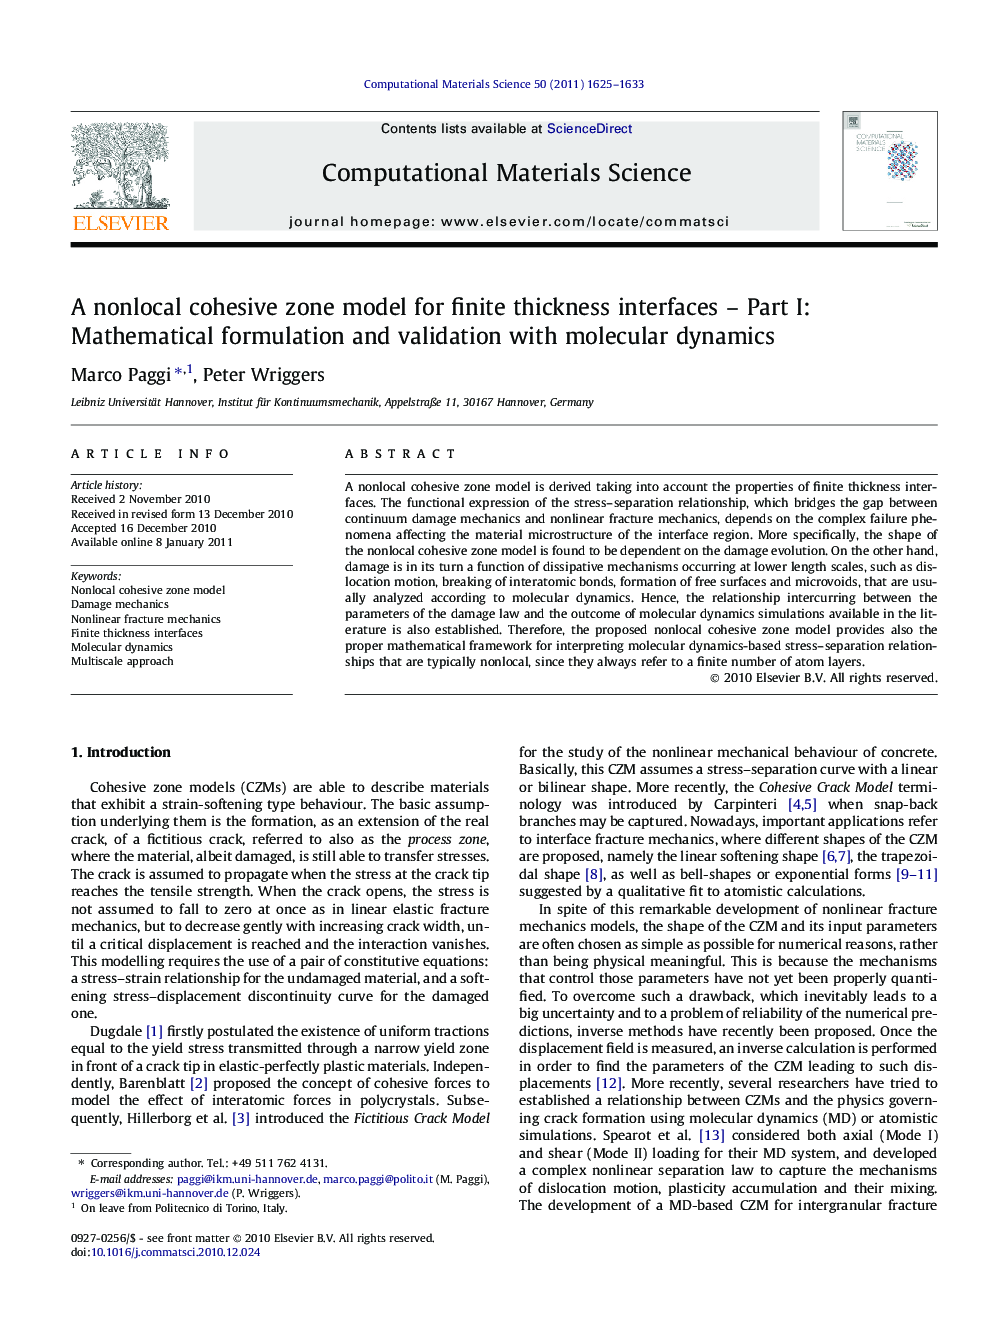 A nonlocal cohesive zone model for finite thickness interfaces – Part I: Mathematical formulation and validation with molecular dynamics